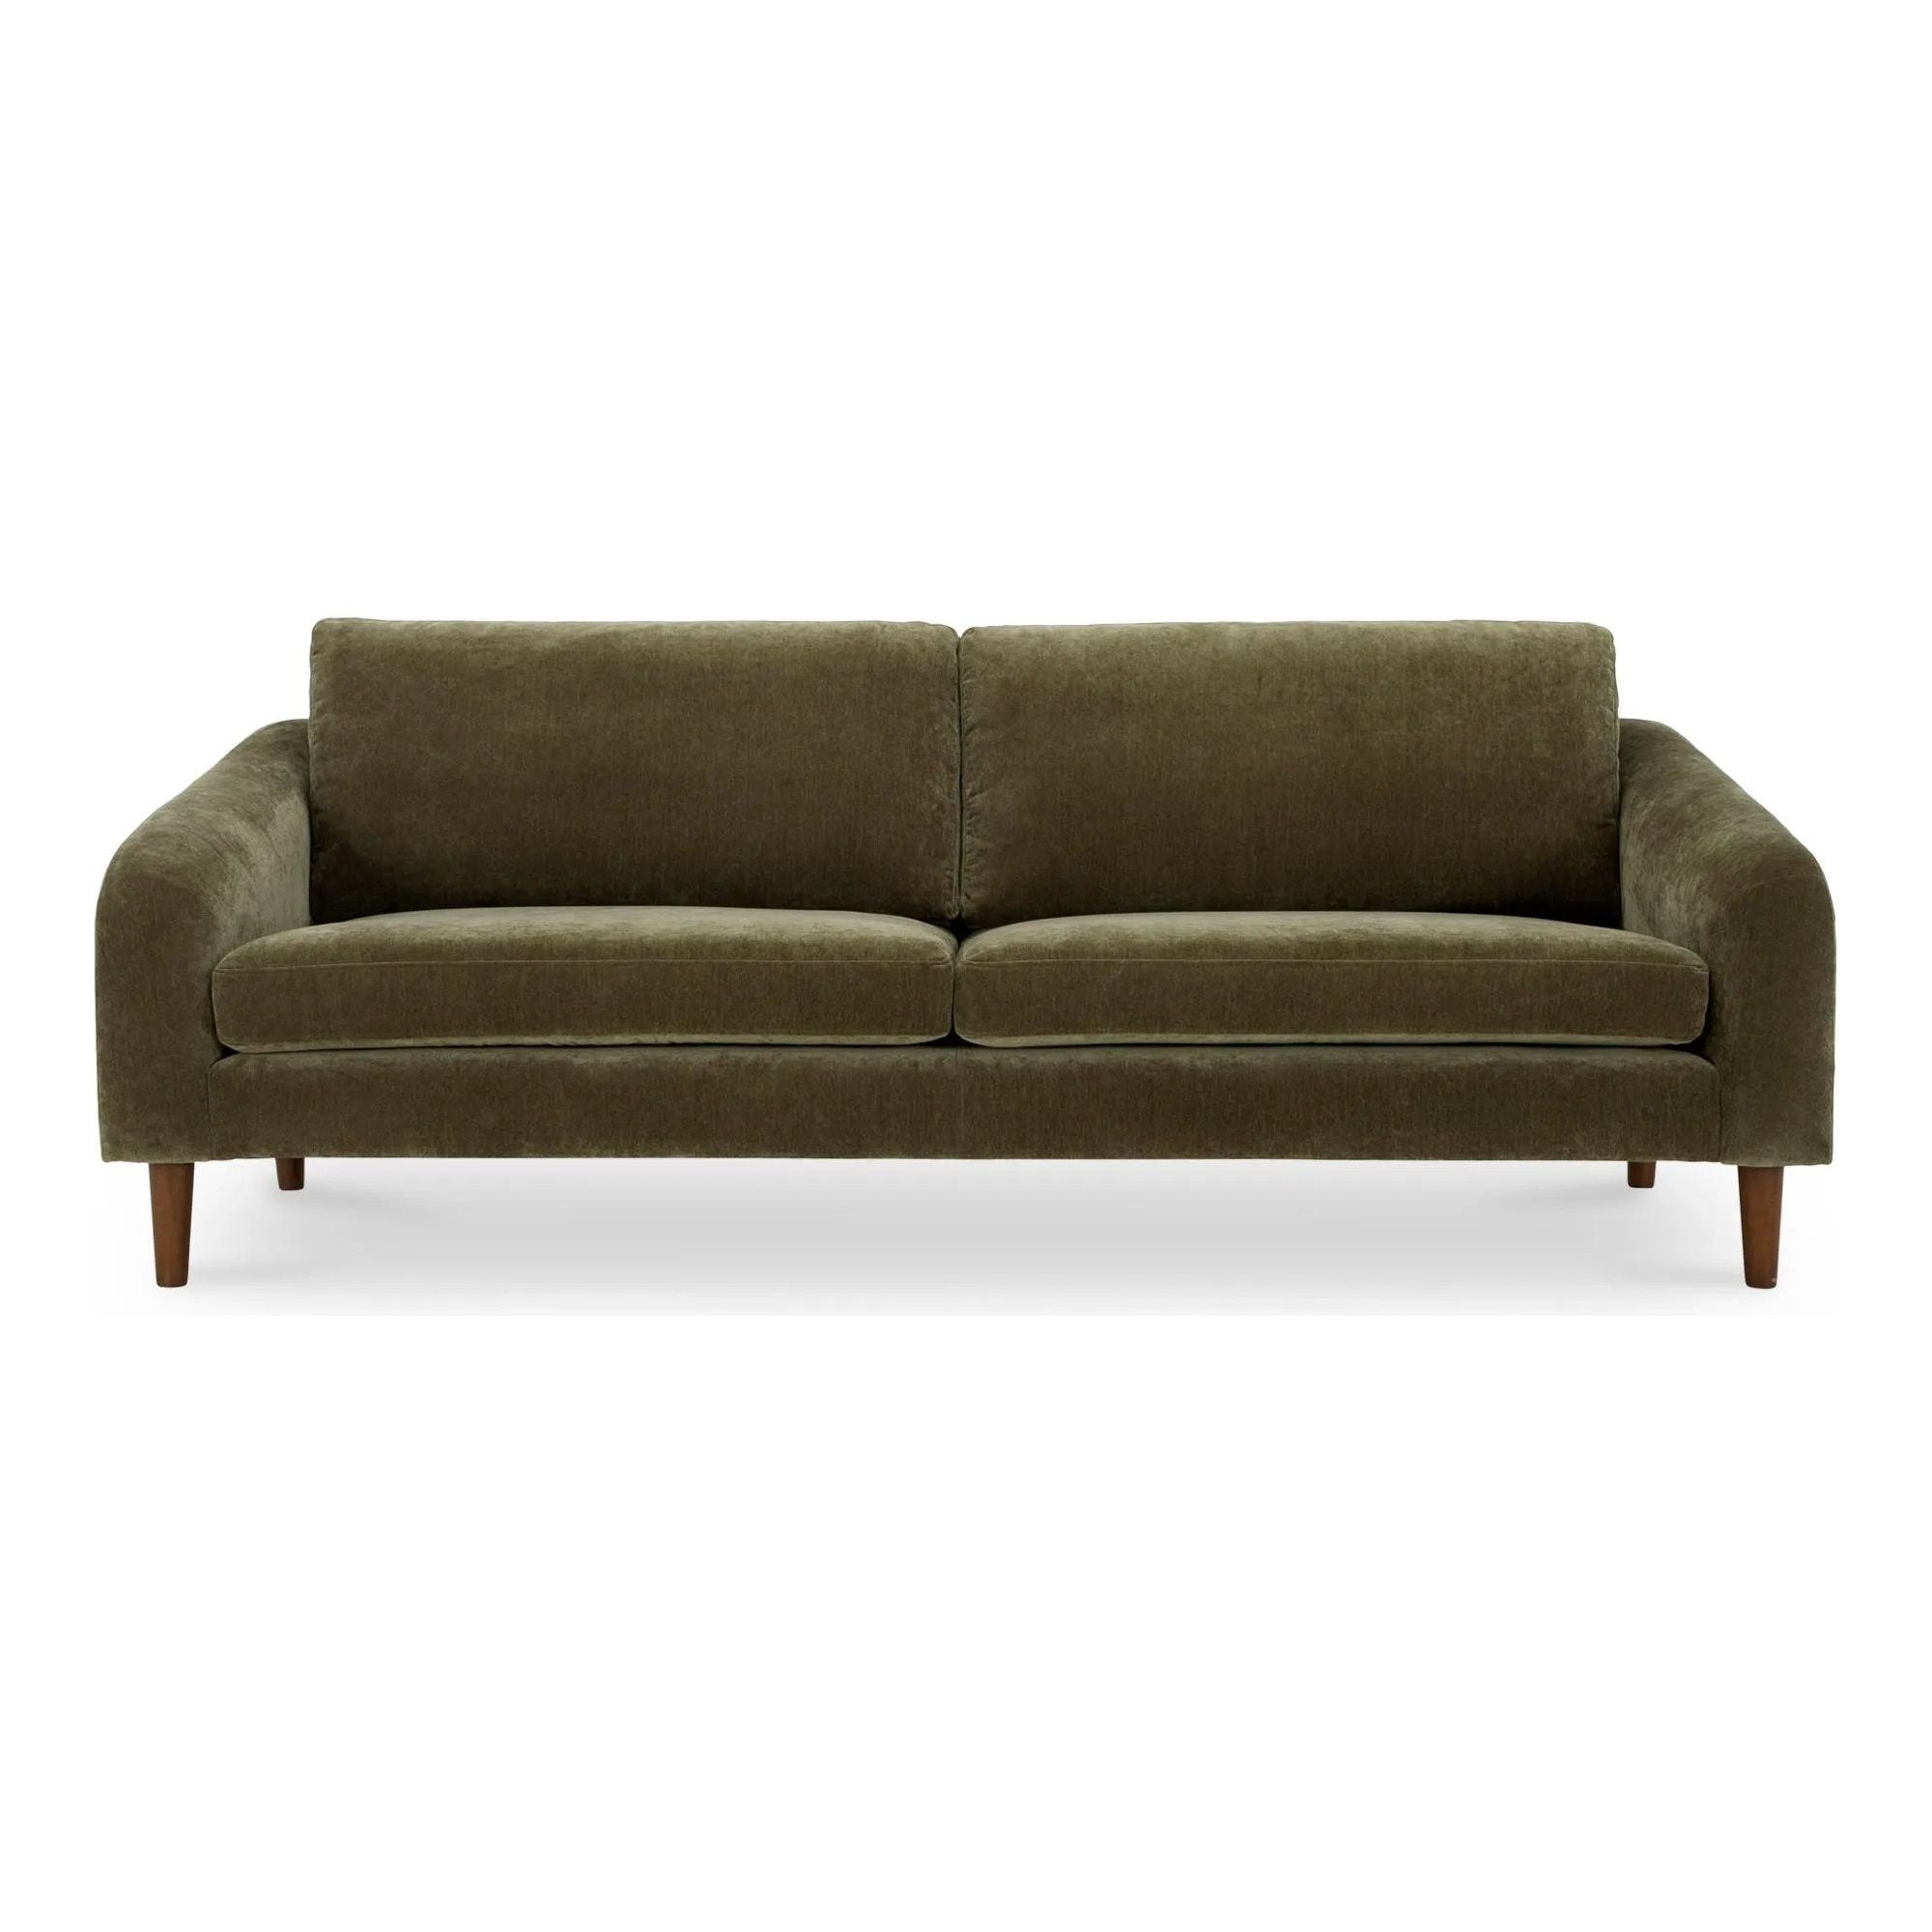 The Quinn sofa’s classic, transitional frame is designed for versatility, harmoniously fitting into a variety of spaces. It stands on a foundation of durability and sustainable charm with a wood frame and legs. Amethyst Home provides interior design, new home construction design consulting, vintage area rugs, and lighting in the Charlotte metro area.